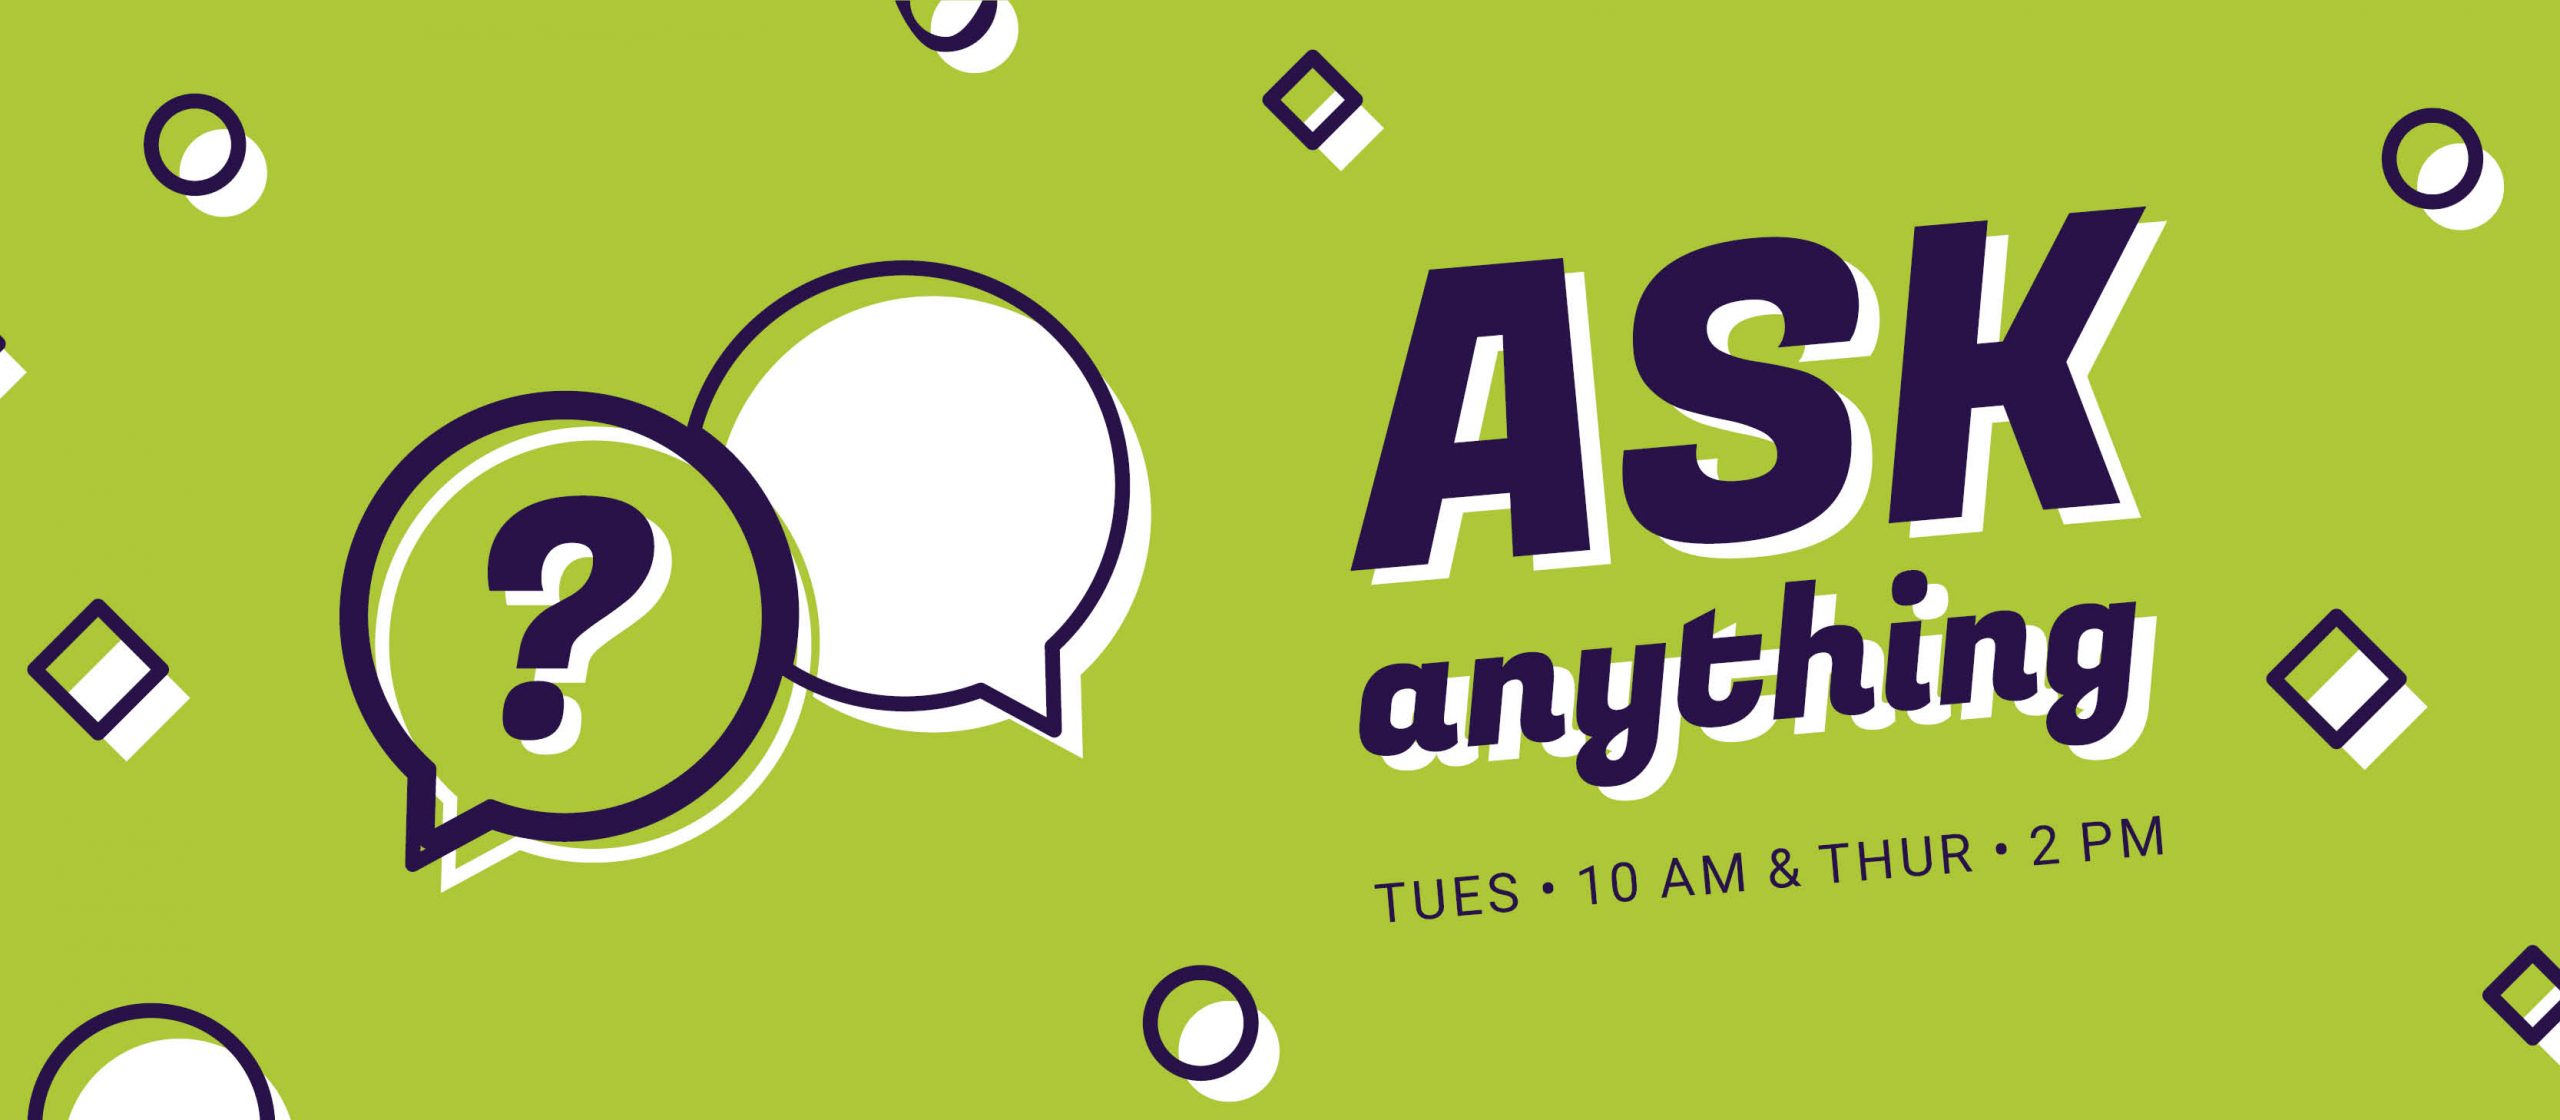 Ask Anything, Tuesdays at 10 AM & Thursdays at 2 PM, Click for more information